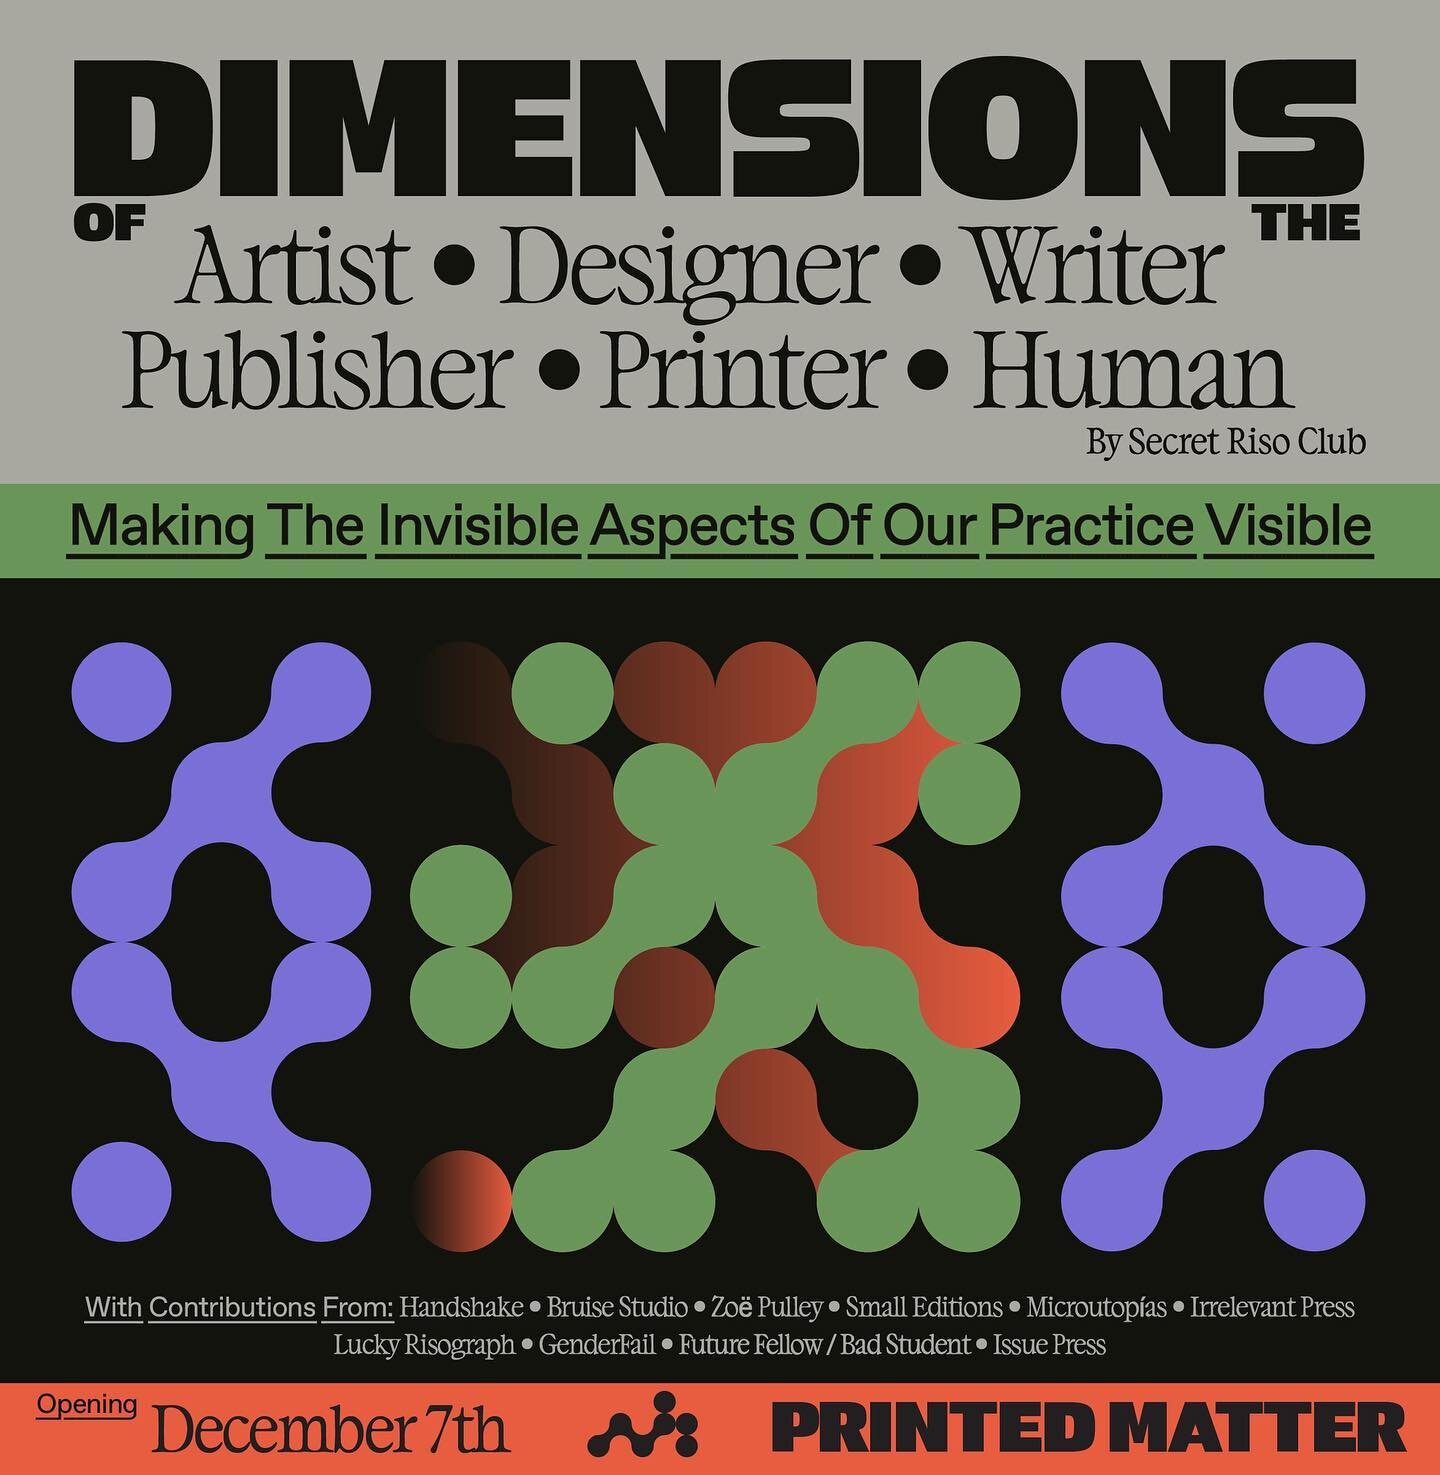 Tomorrow 12/7 from 6-8th we&rsquo;ll be at @printedmatterinc opening reception for &ldquo;DIMENSIONS&quot; organized by @secret_riso_club 

~~
&rdquo;DIMENSIONS&quot; is a collaborative project from Secret Riso Club. Through interviews with 10 artist